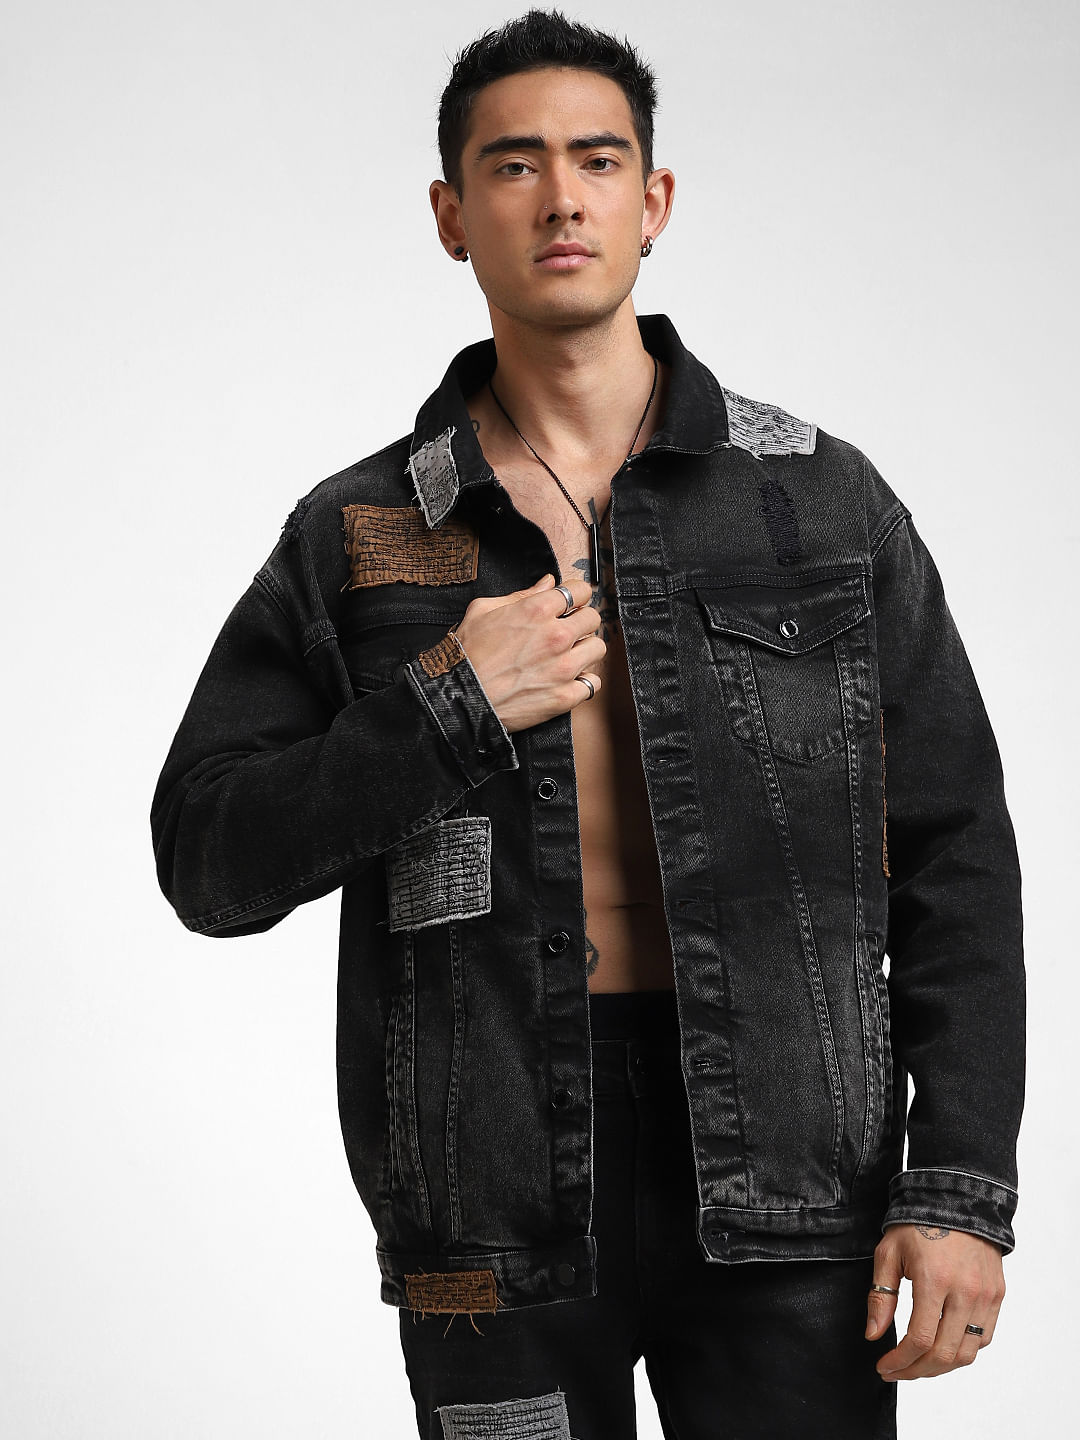 Shop Hooded Denim Jacket for Men from latest collection at Forever 21   432574